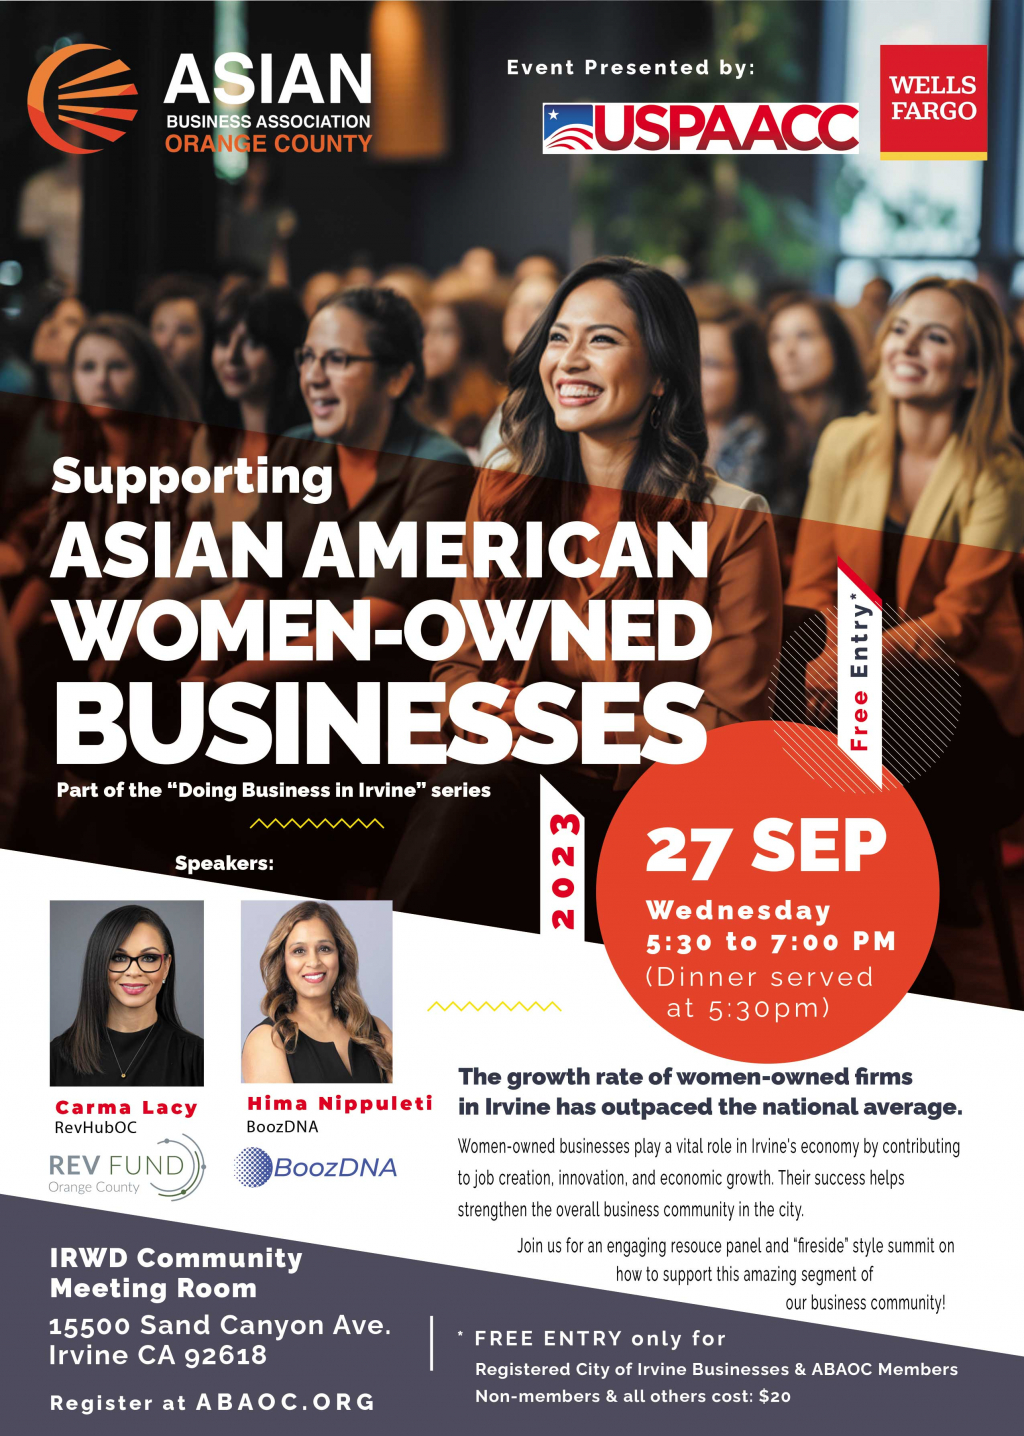 ABAOC Invites Executive Director of RevHub to Be Panelist at Women-Owned Business Event